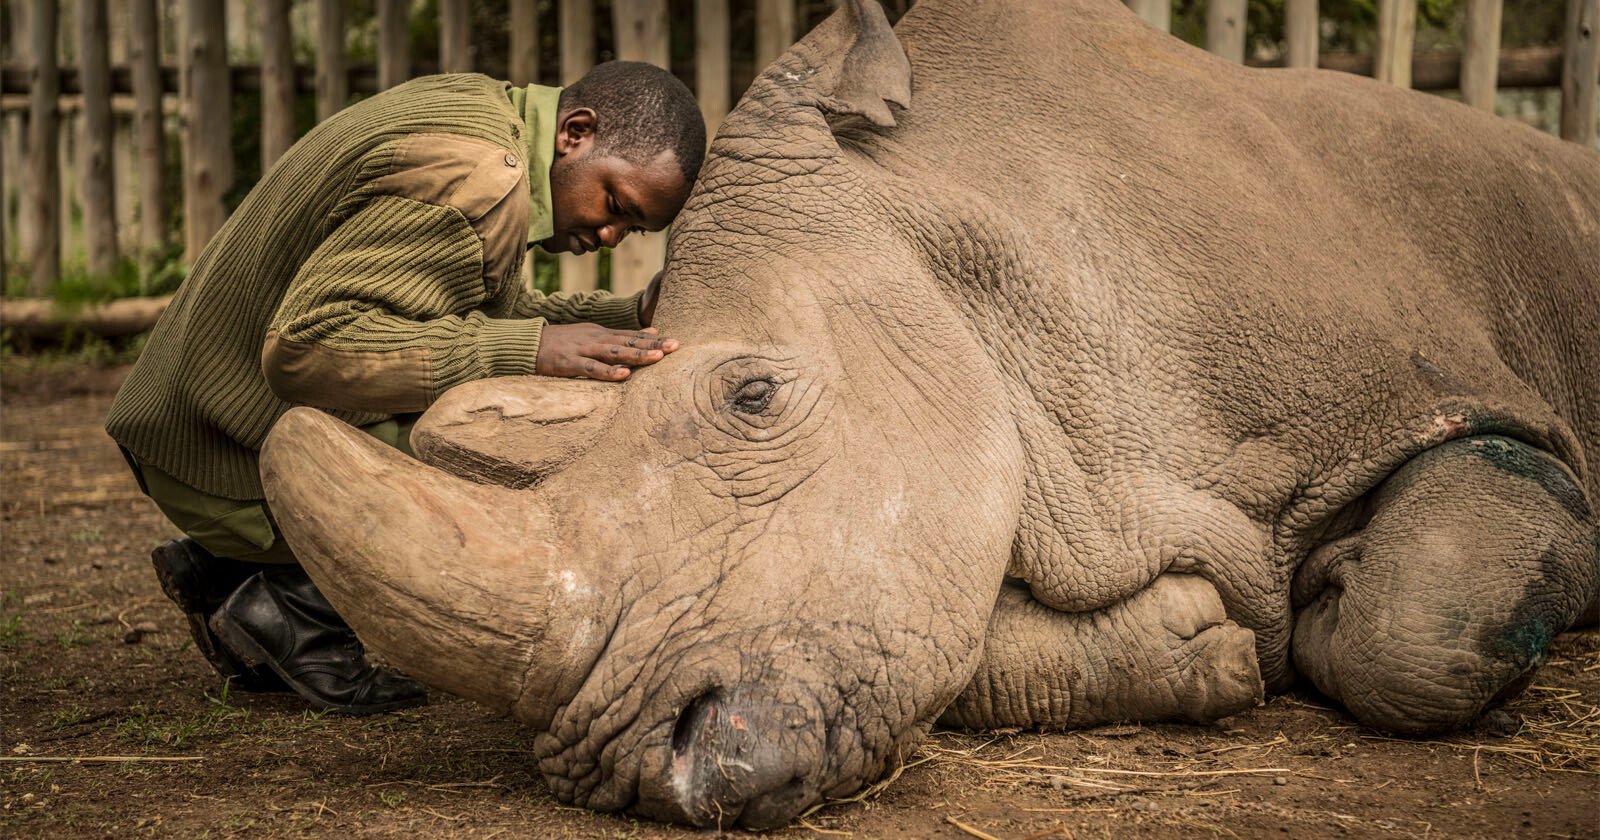 Remembering Sudan is a Film About the Last Male Northern White Rhino